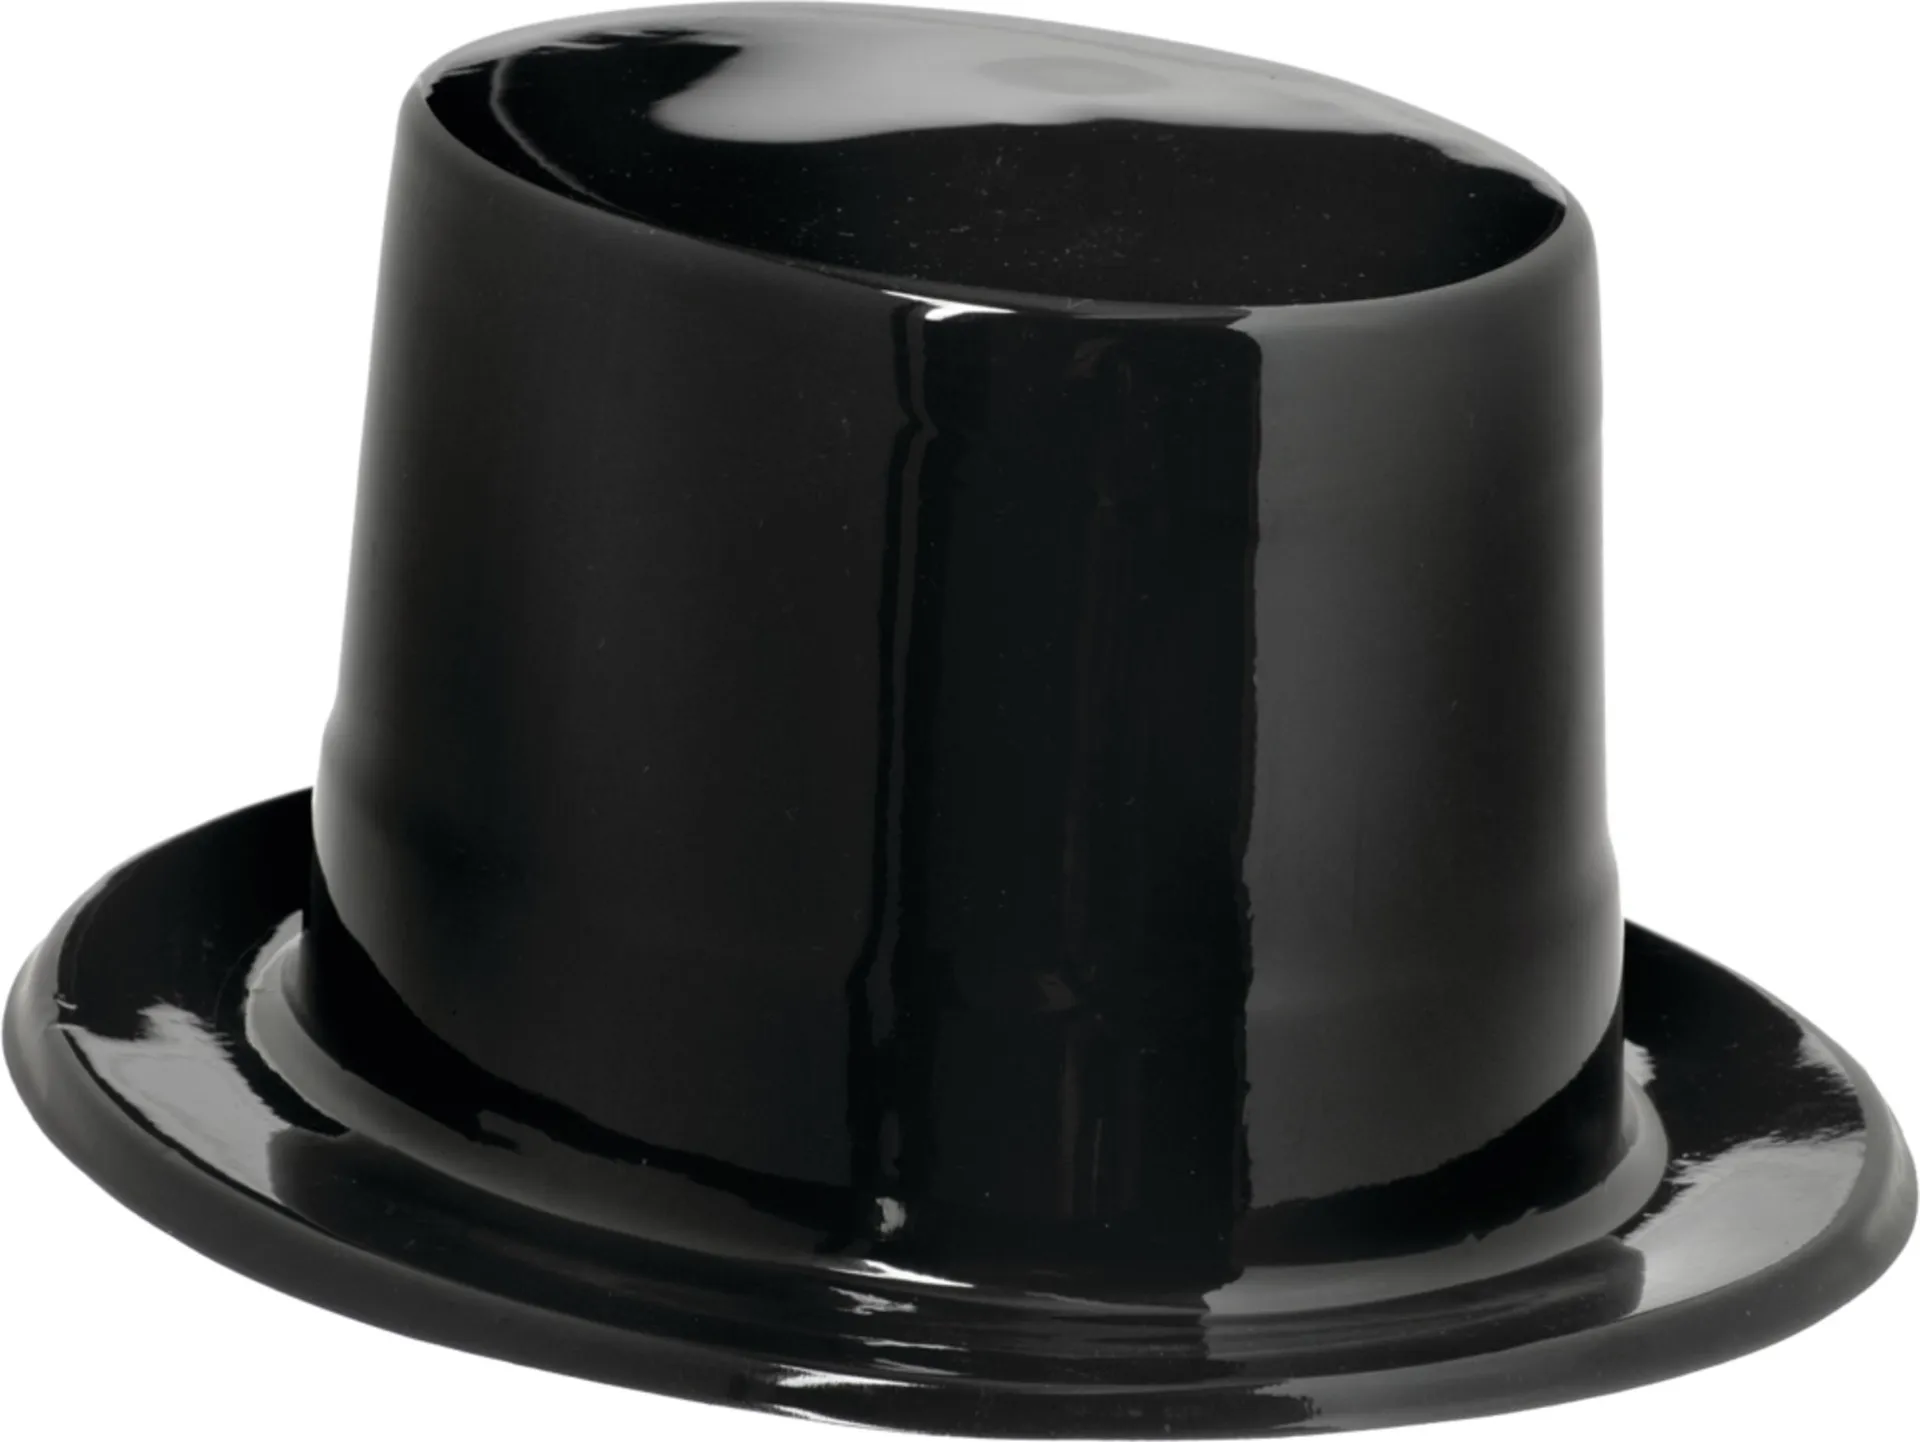 Shiny Plastic Top Hat, Black, One Size, Wearable Costume Accessory for Halloween